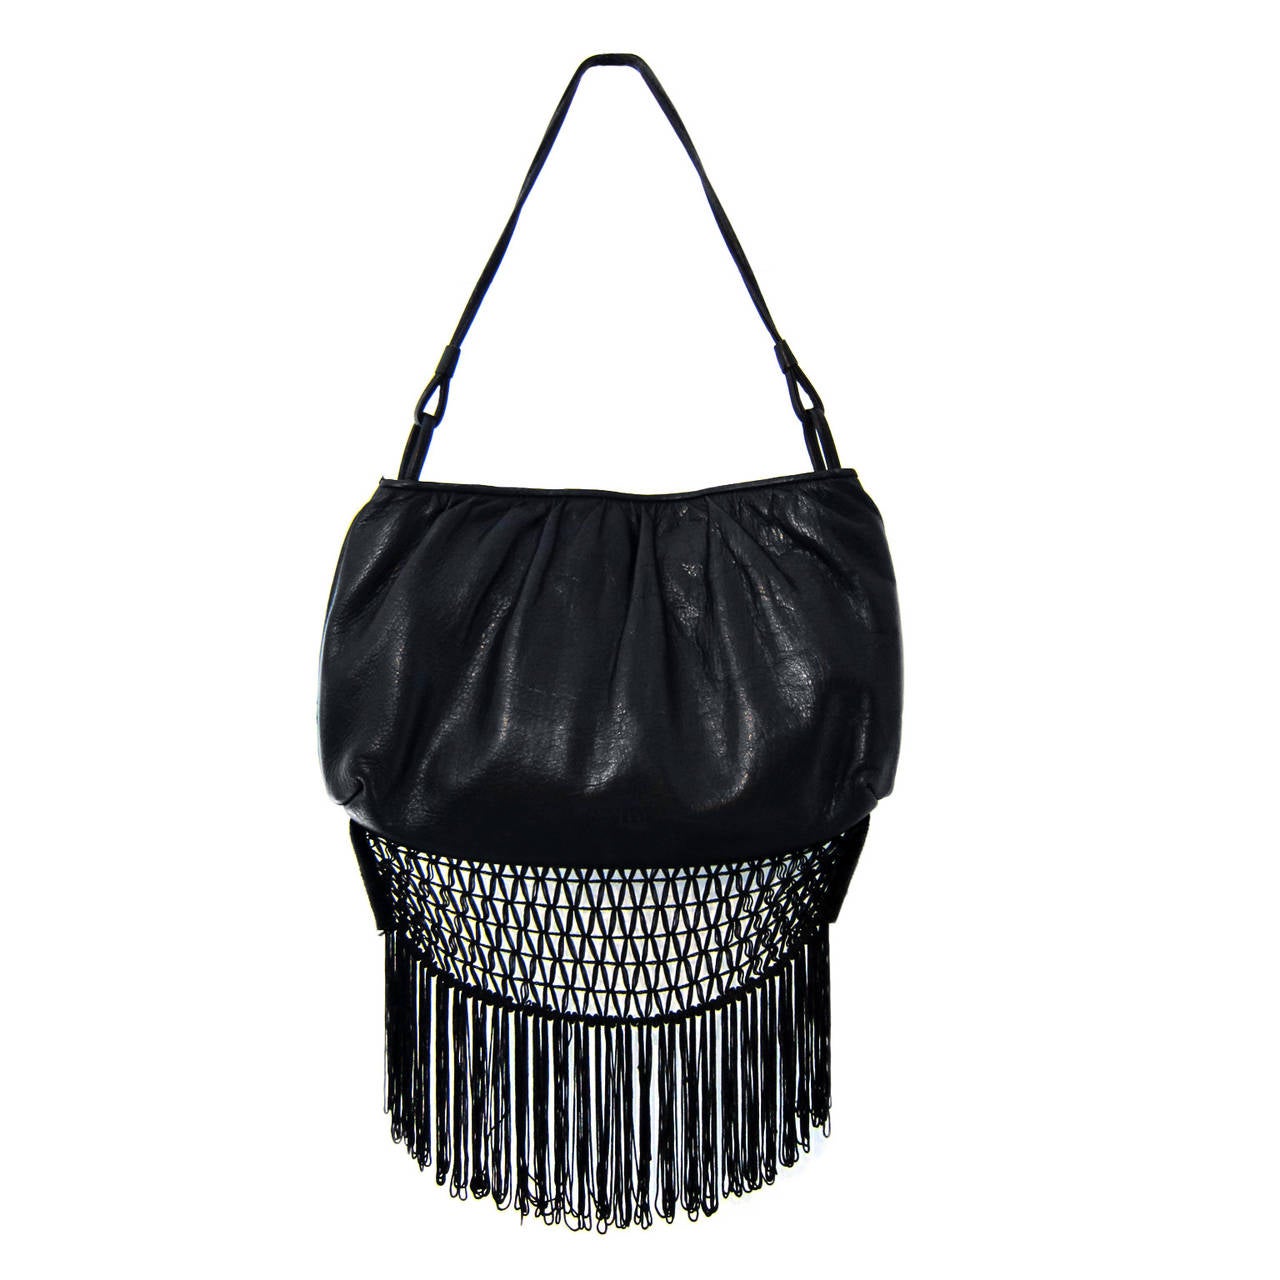 Alexander Mcqueen victorian inspired black leather purse with flower embroidery.
It has contrasted sky blue lining 2 pockets and one zip pocket. 
Sz : 20 x 30 x 5 cm 
Handle 55 cm 
Fringe Length 16 cm